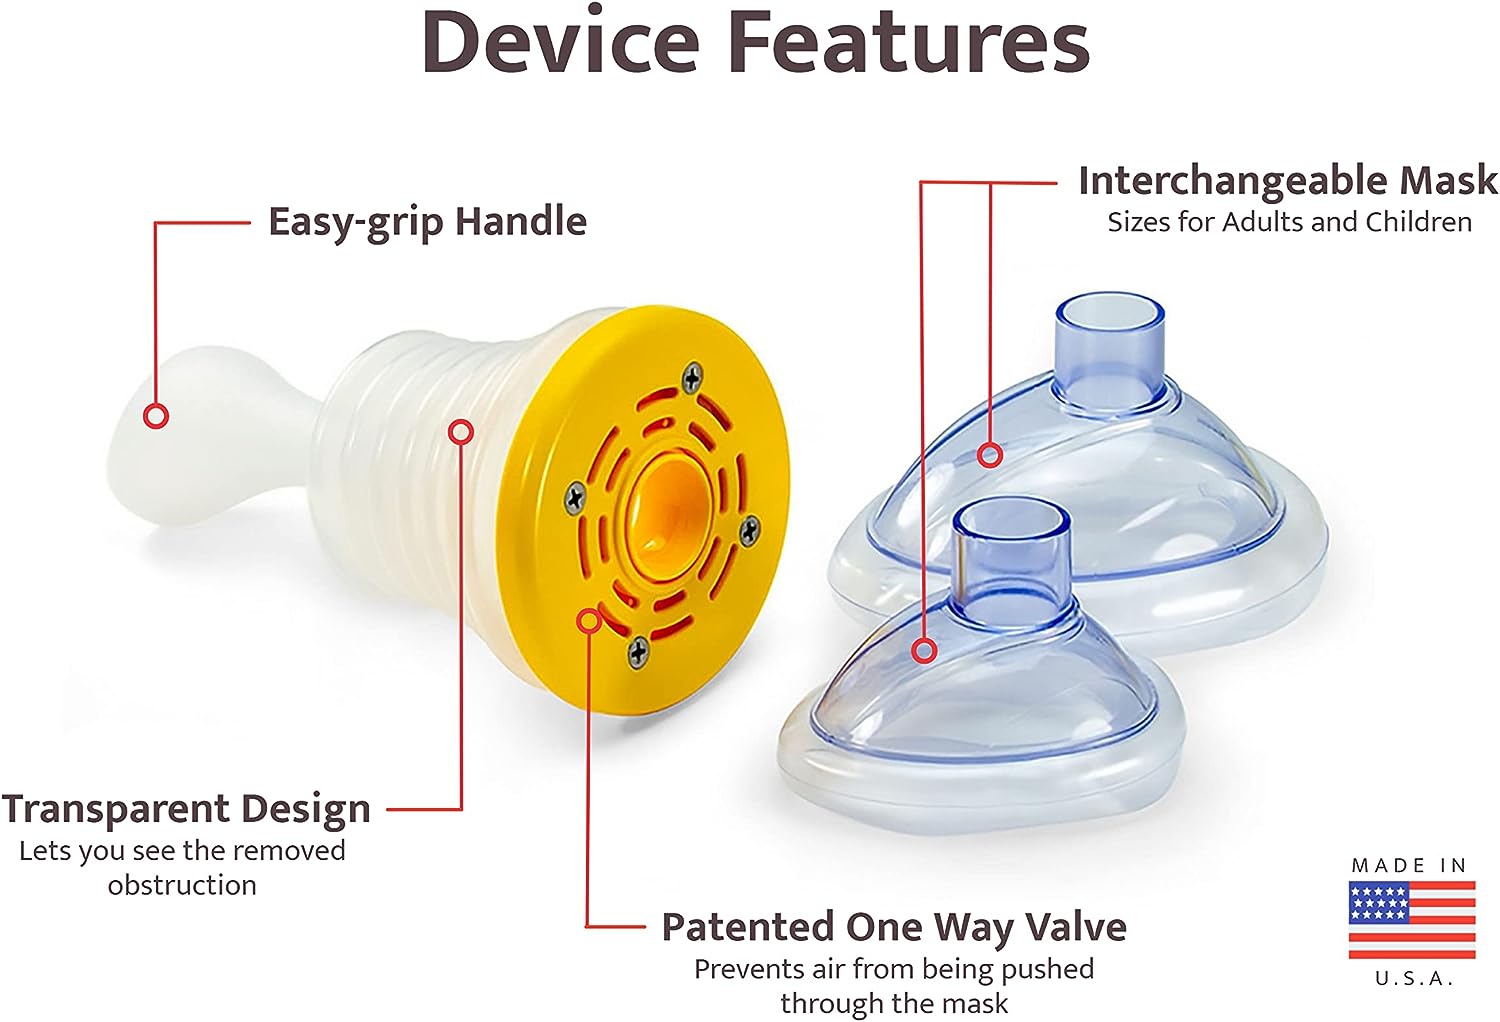 LifeVac With Child and Adult Mask